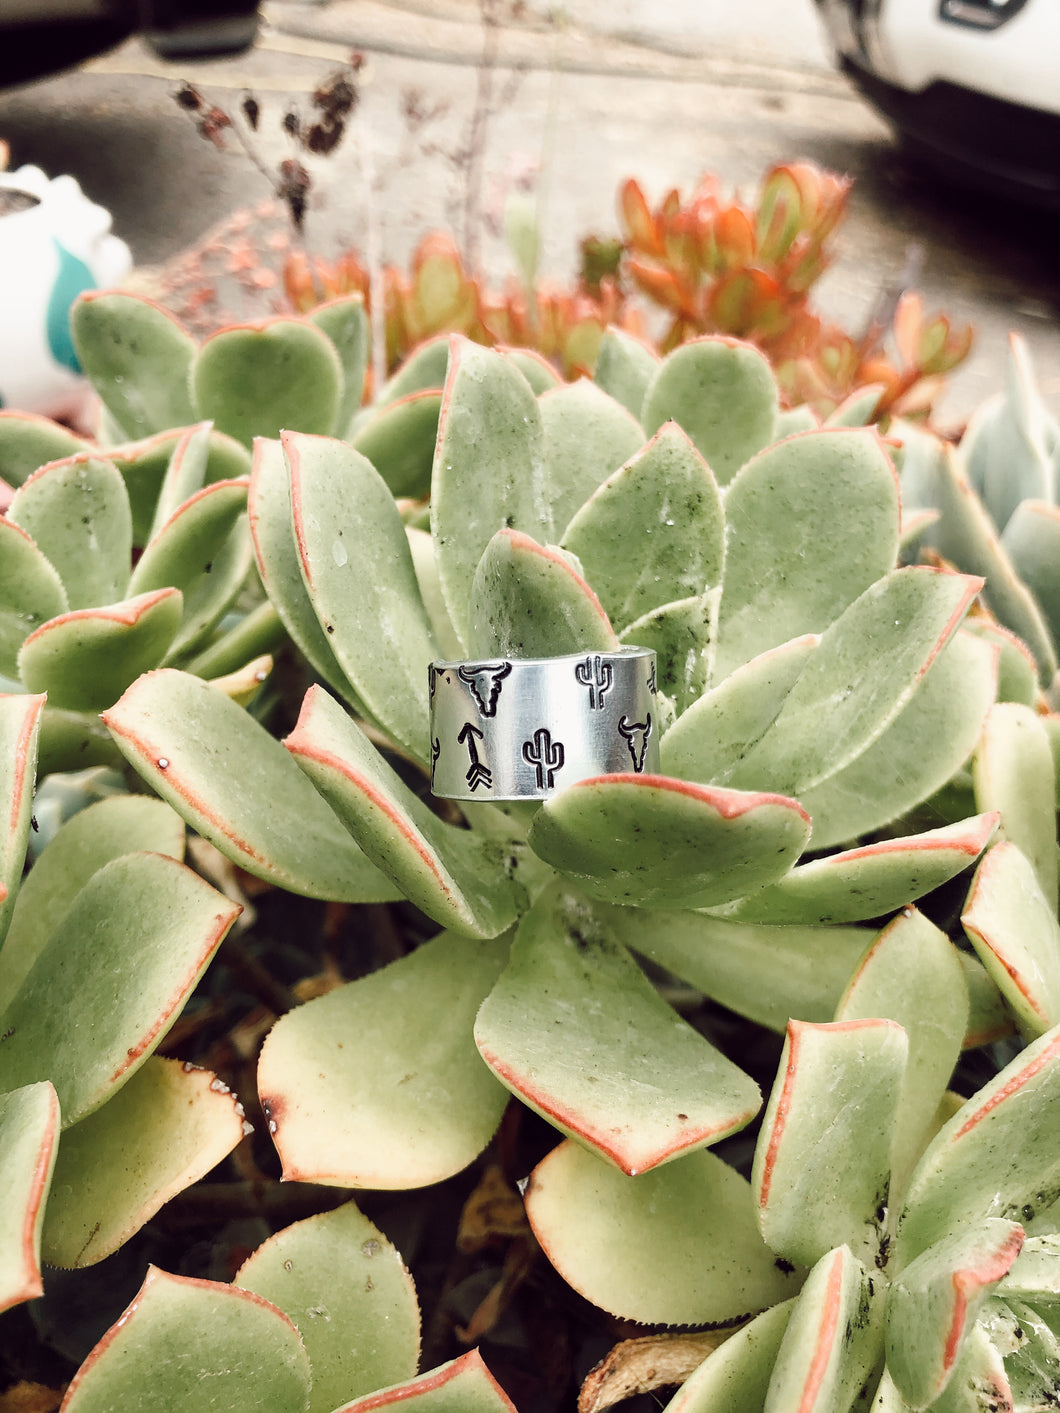 Cactus, Steer and Arrow Ring